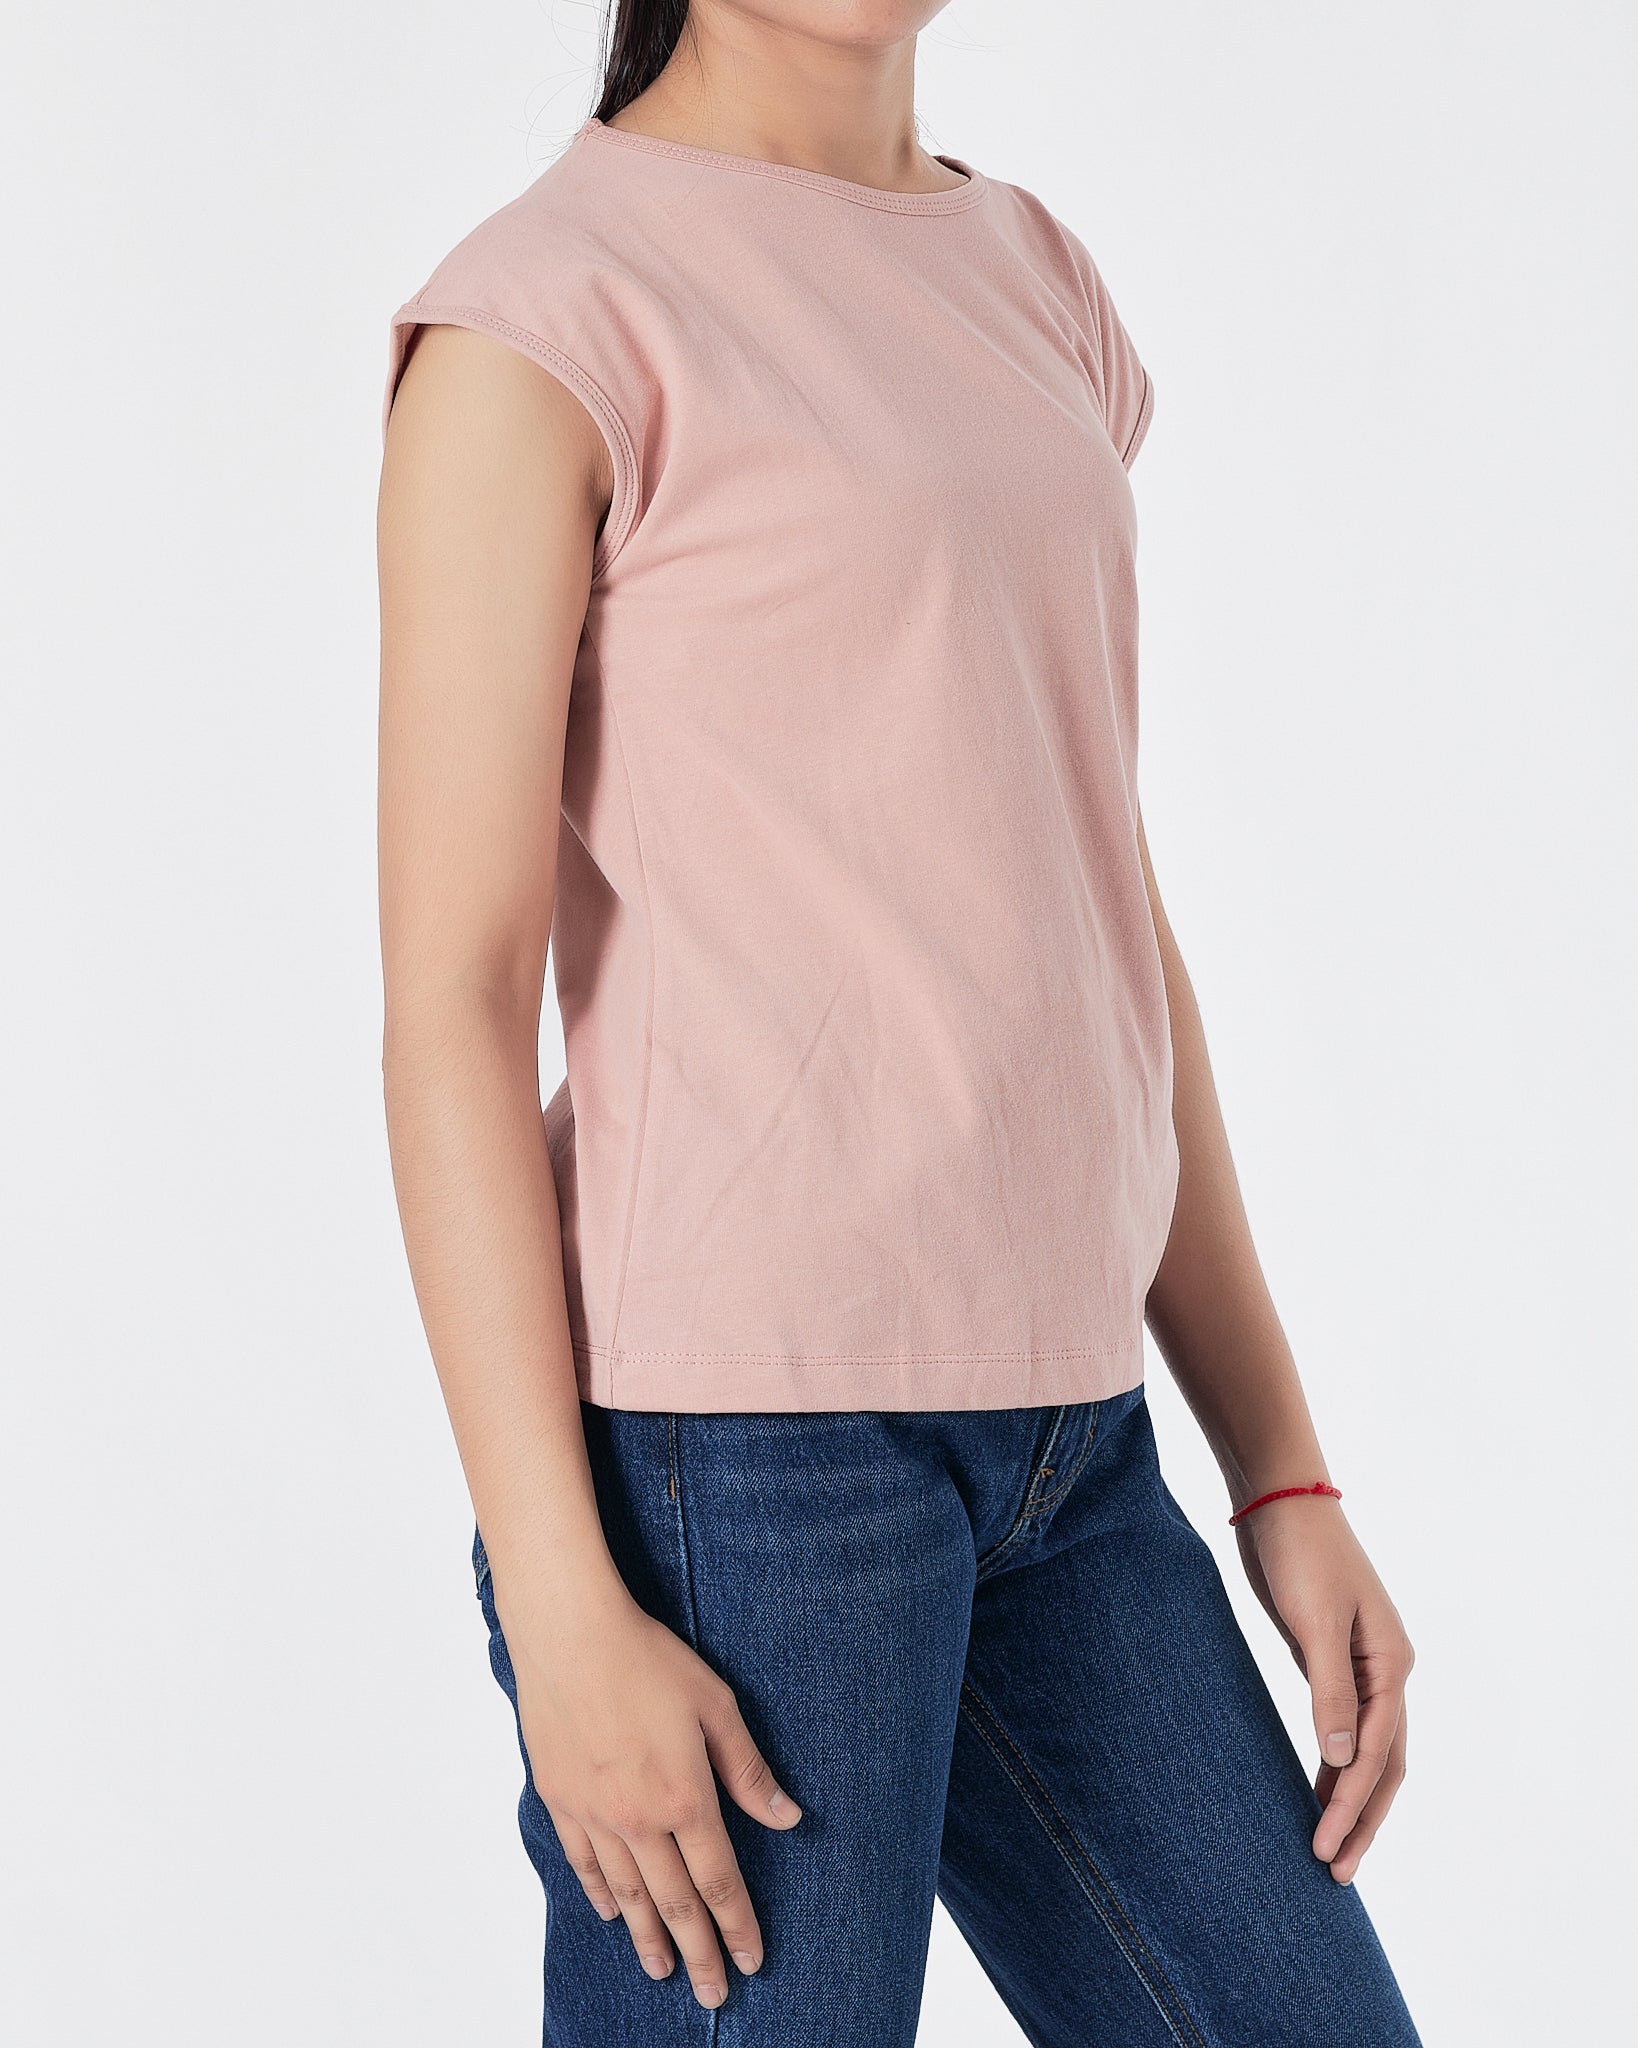 Pink Solid Waist Hole Lady T-Shirt 12.90